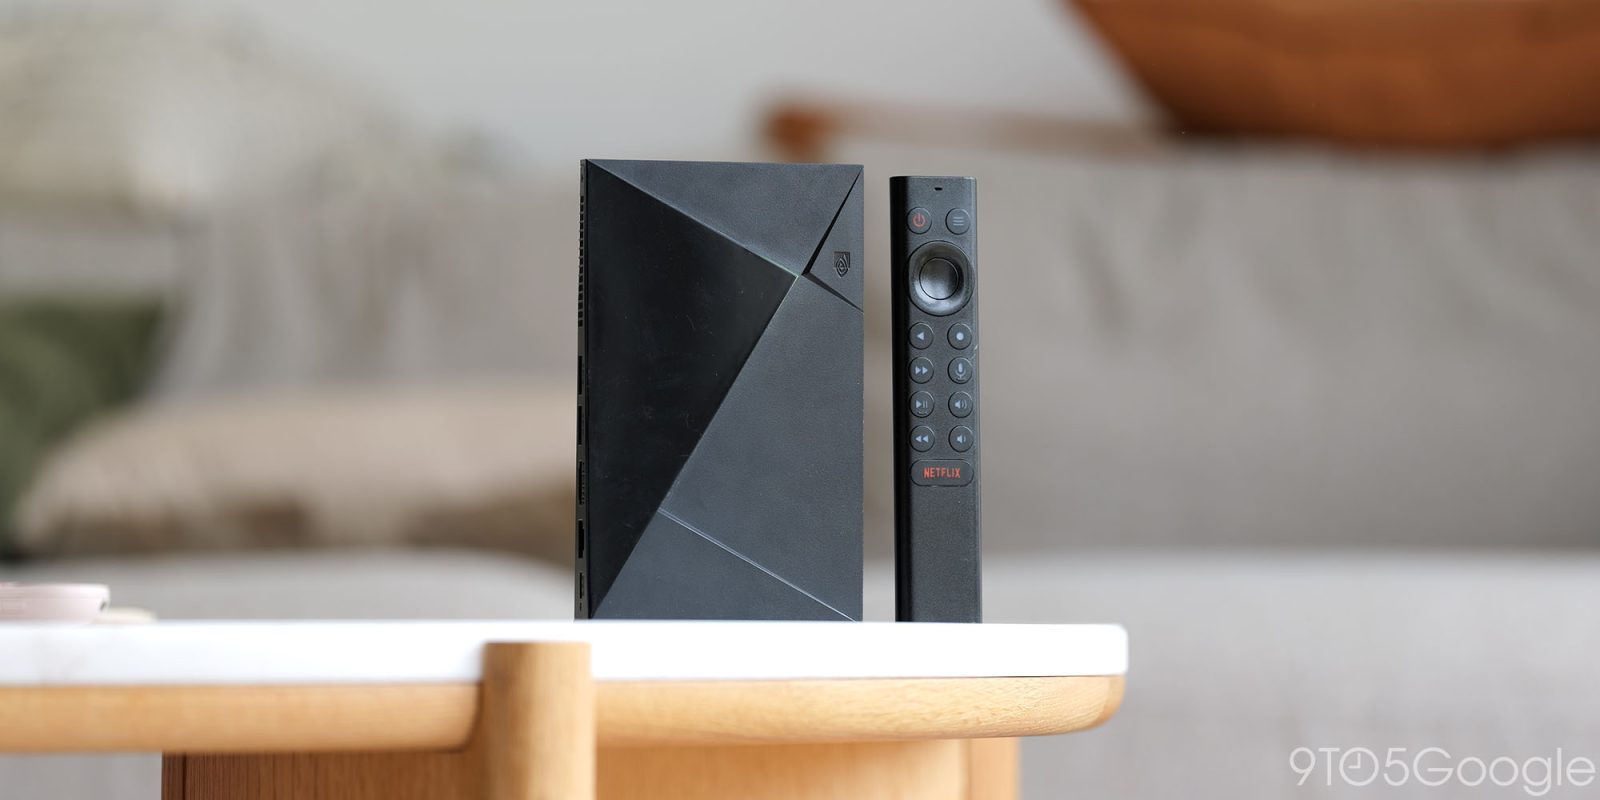 Years later the Nvidia Shield TV is still the best all-around Android TV box [Video]